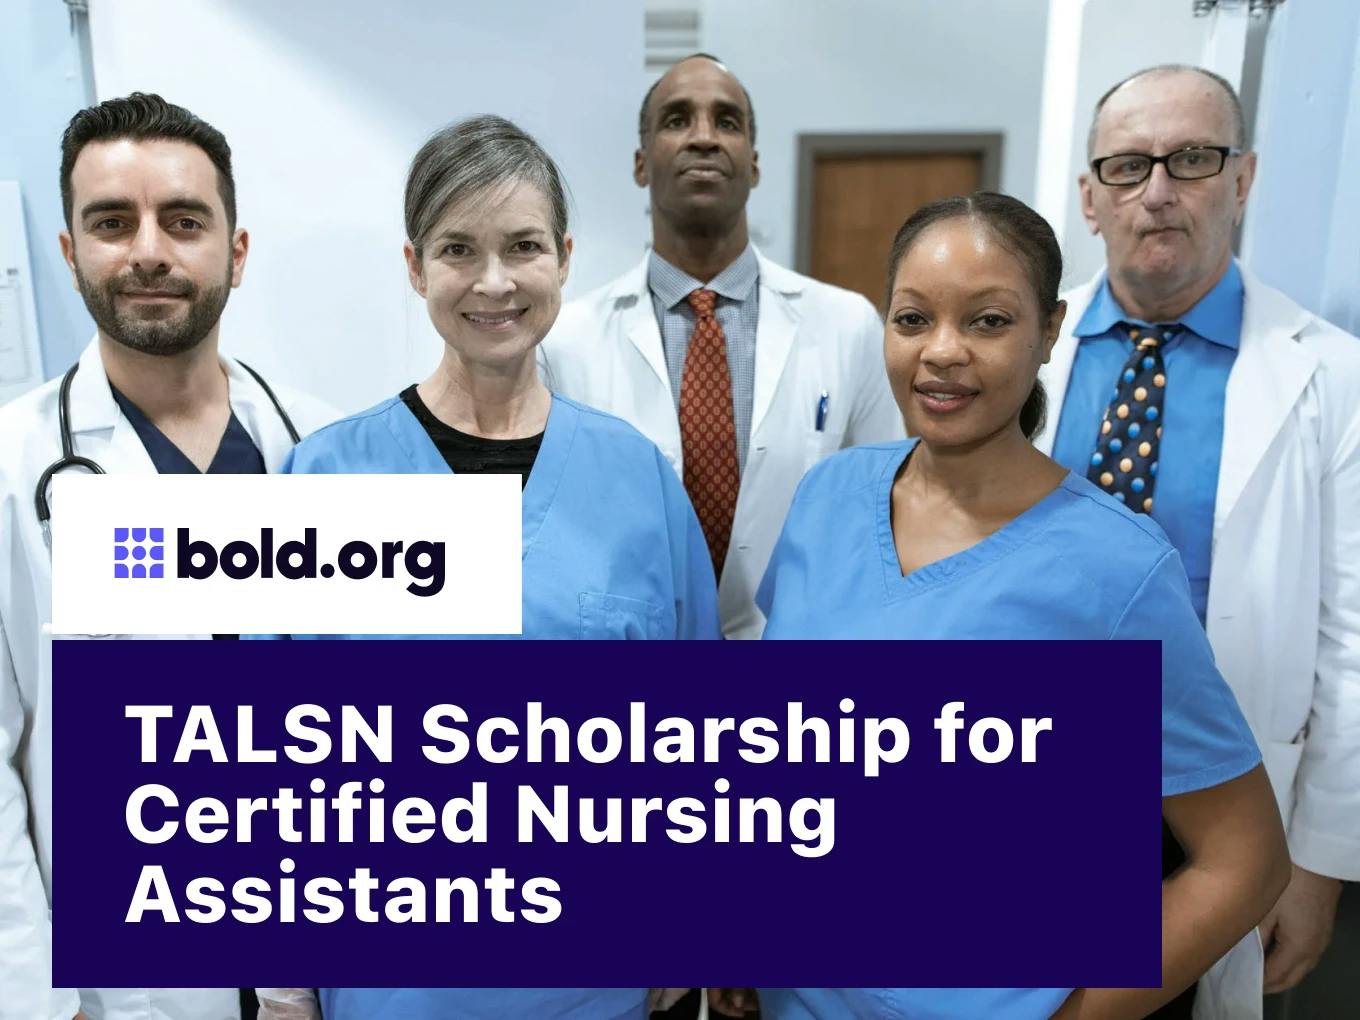 TALSN Scholarship for Certified Nursing Assistants